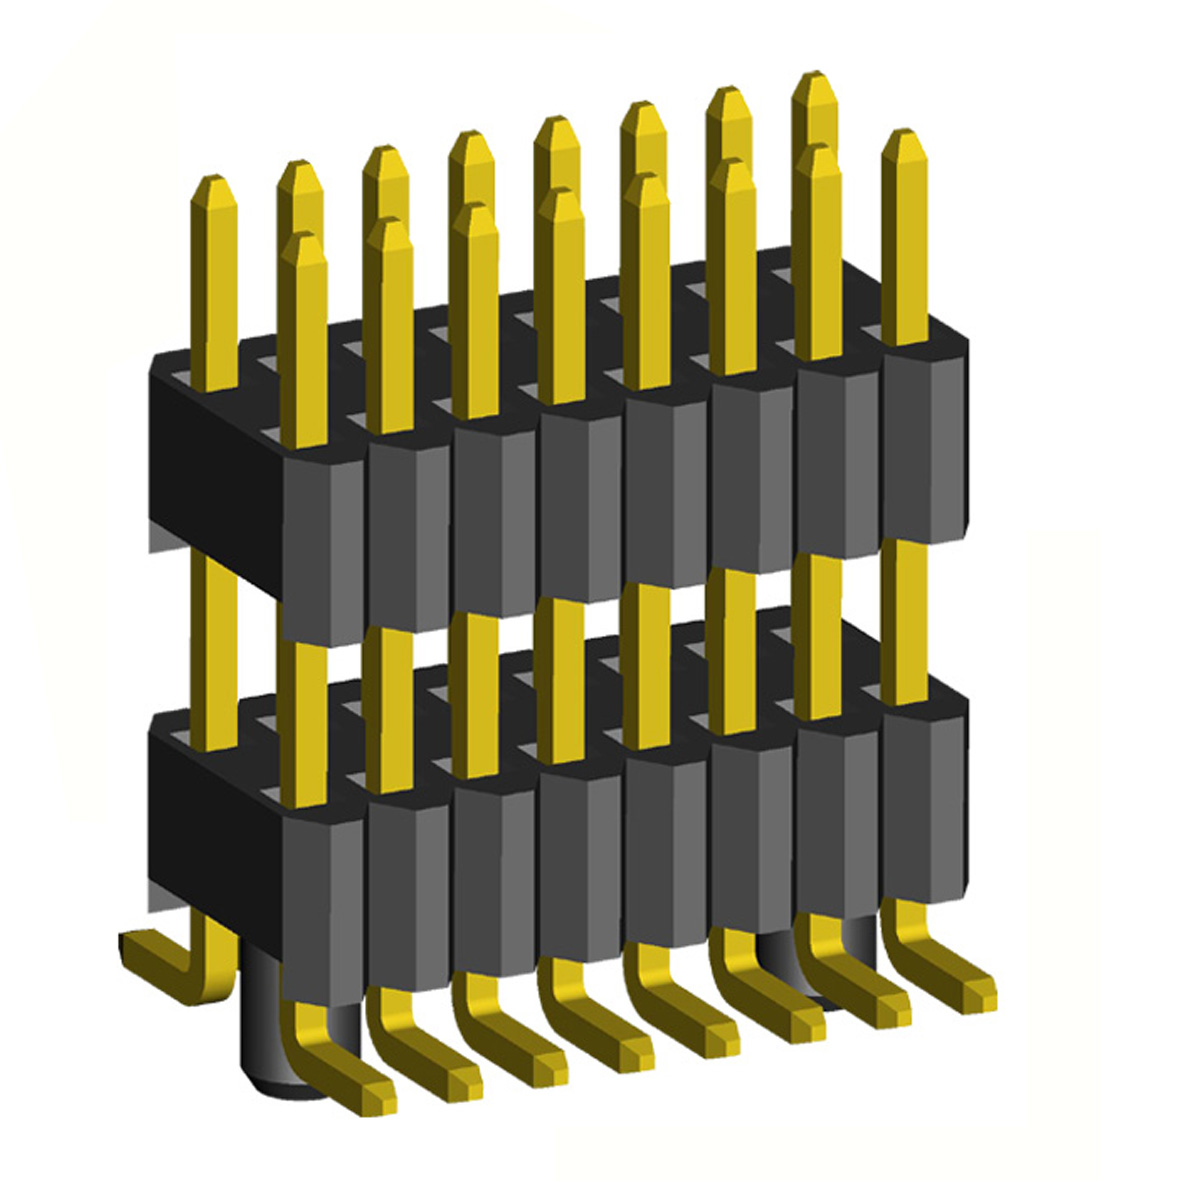 2206PBDI-XXXG-SM-XXXX-PG series, plugs open straight double row with double insulator on the Board for surface (SMD) mounting with guides on the Board, pitch 1,27x2,54 mm, Board-to-Board connectors, pin headers and sockets > pitch 1,27x2,54 mm